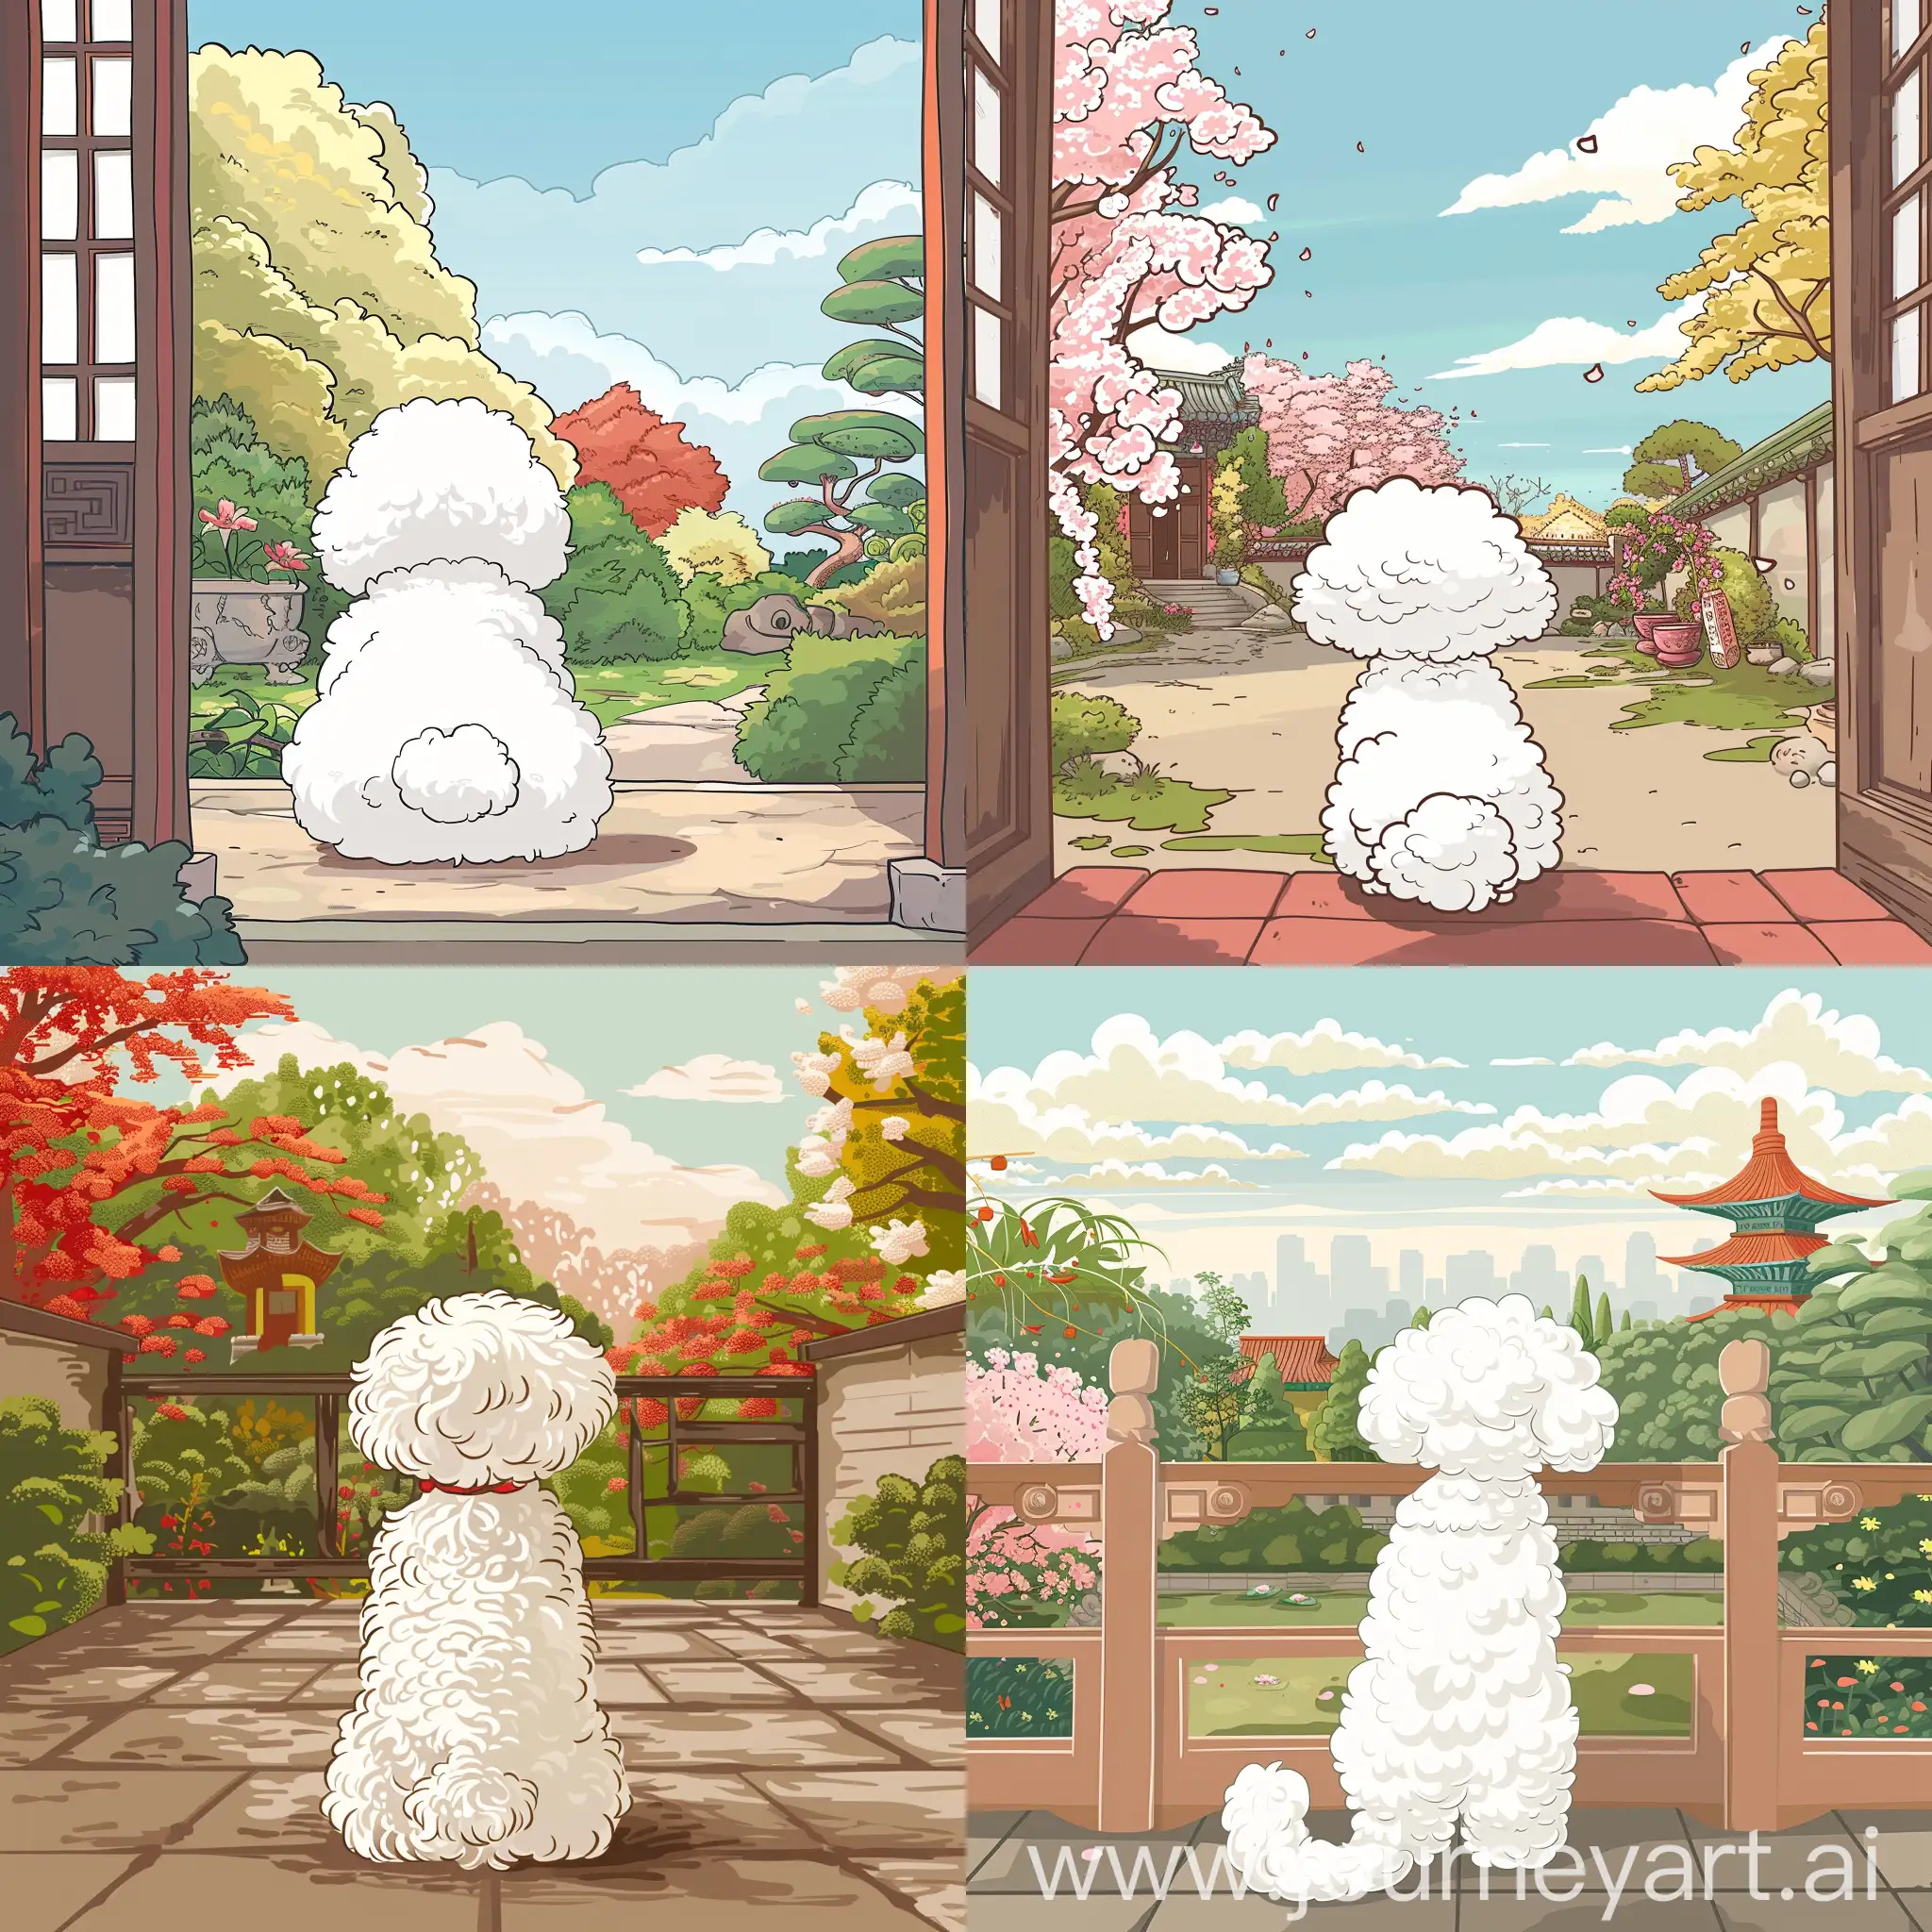 illustration of a spring day in a garden in southern China, showing the back view of a white Bichon Frise, in high quality cartoon chibi style